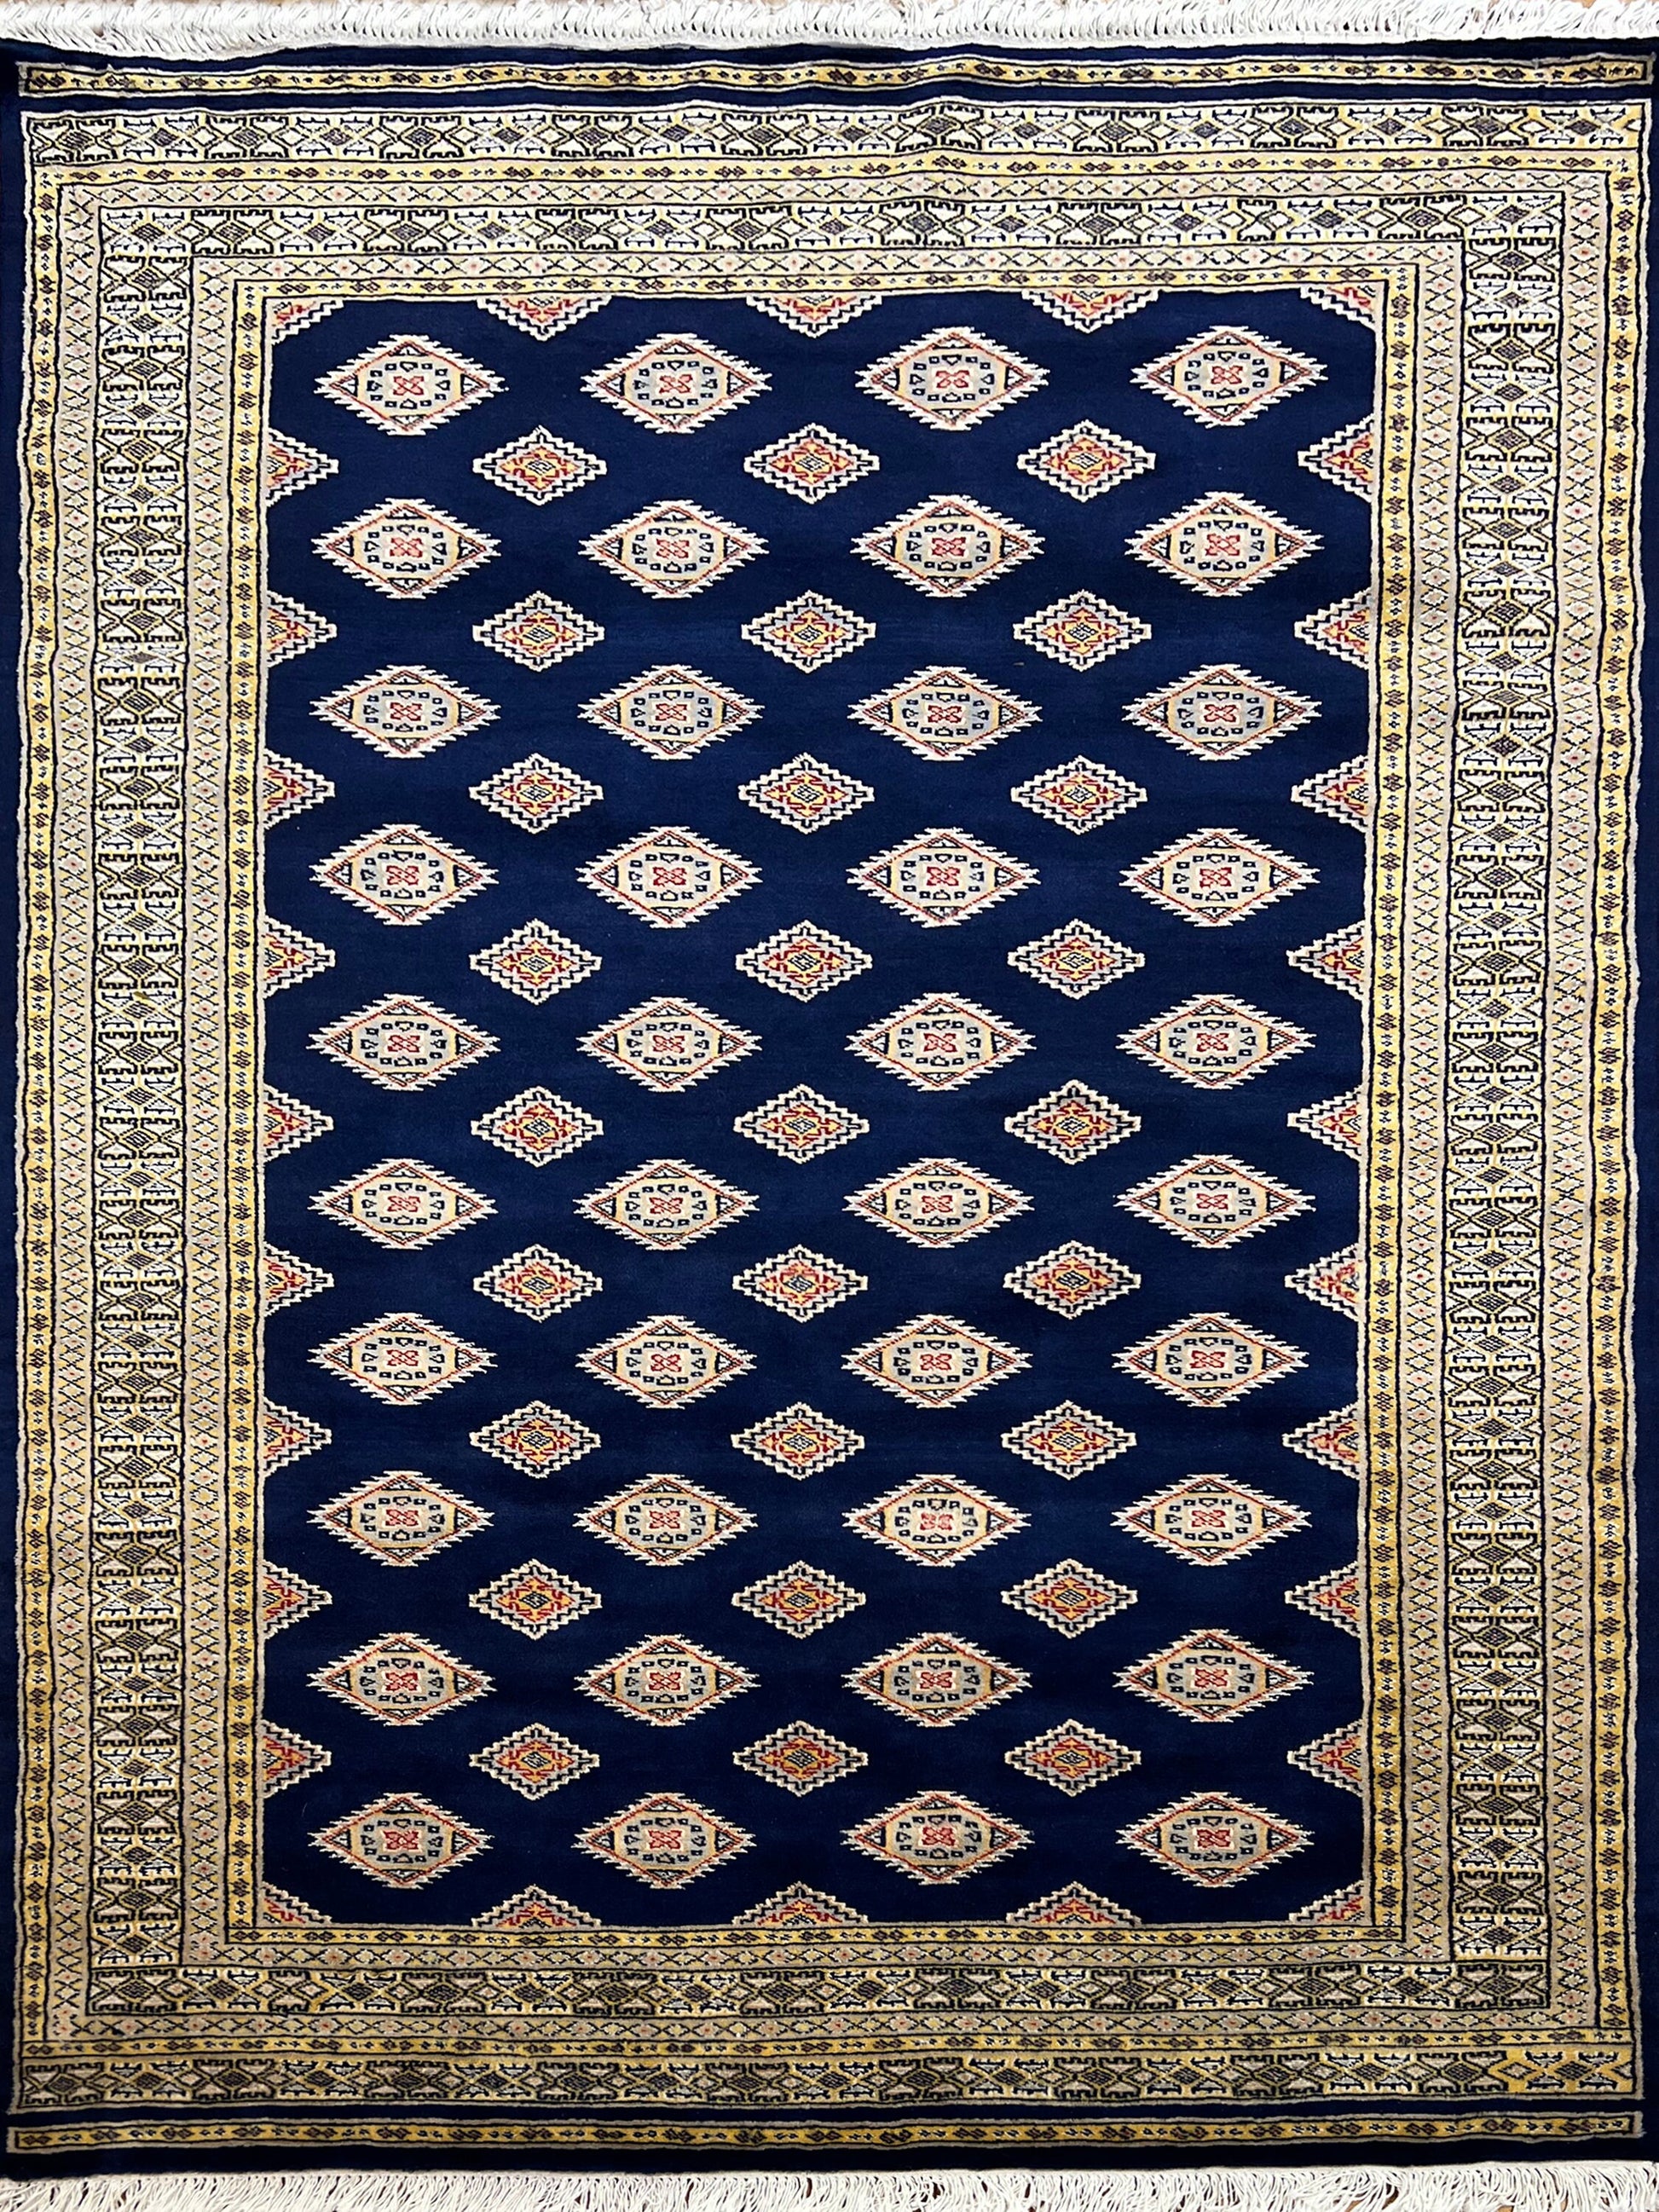 Pende Bokhara Rug | 6'11" x 4'7" | Home Decor | Hand-knotted Area Rug